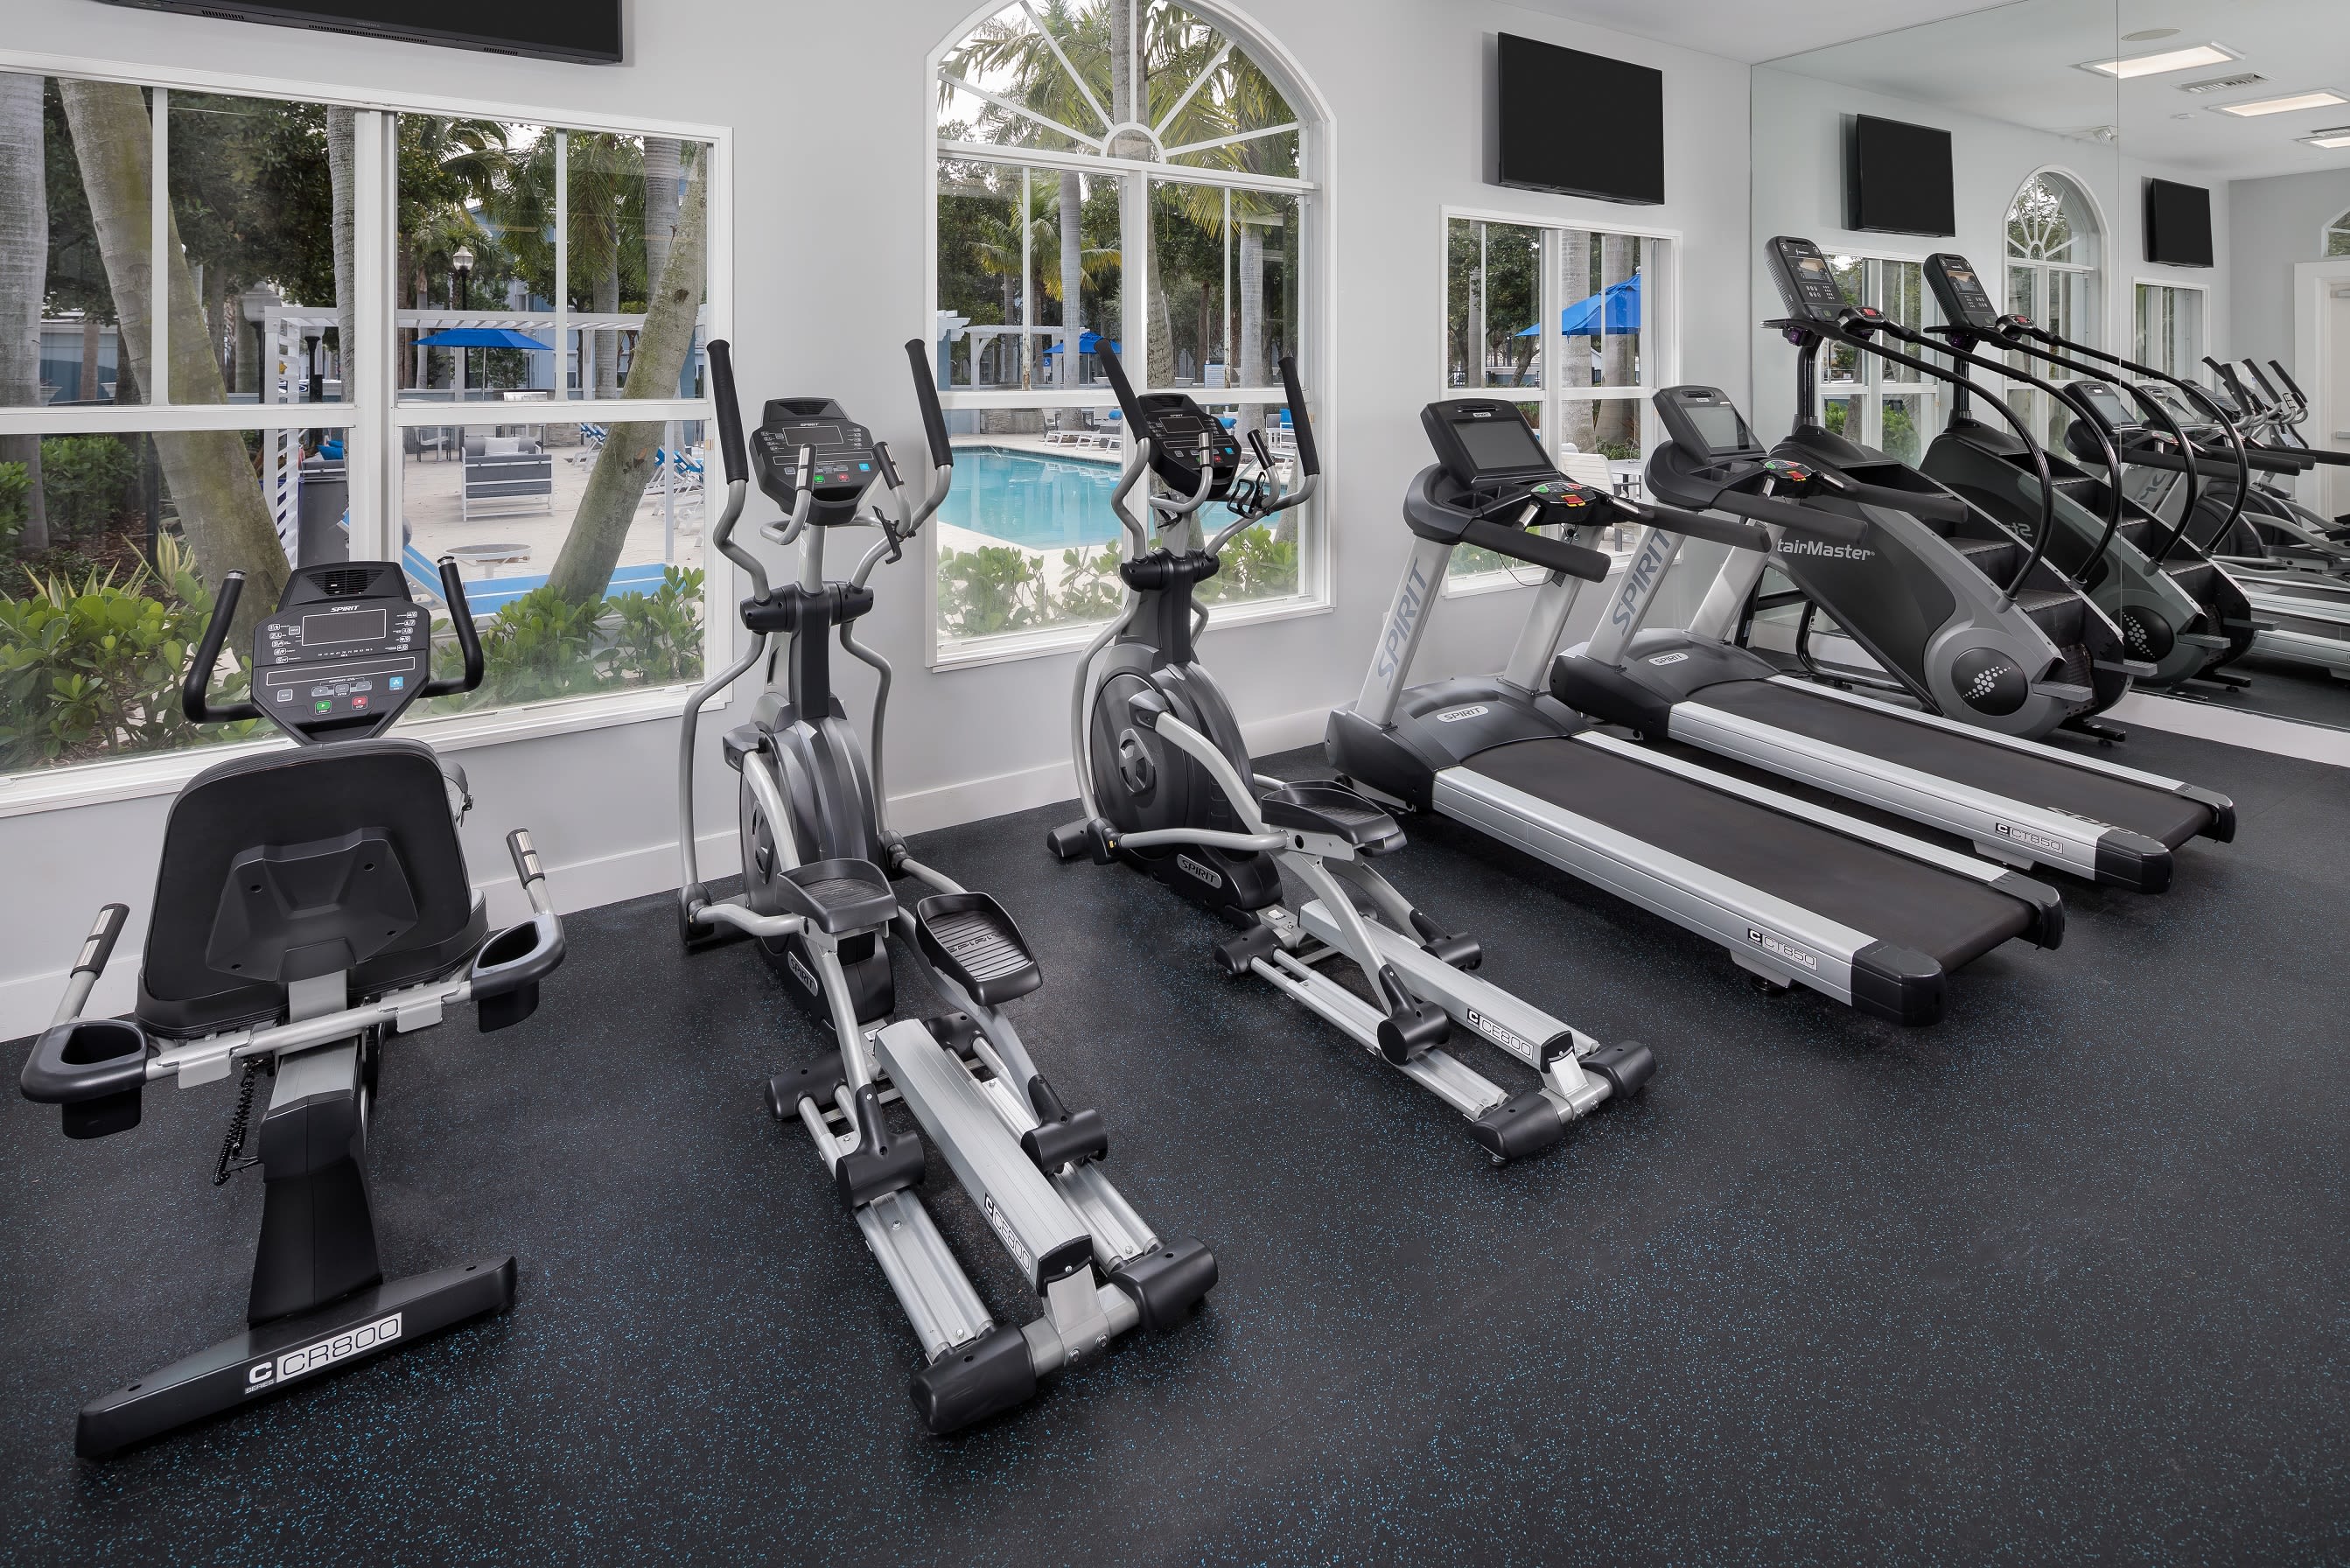 Onsite fitness center at The Pearl in Ft Lauderdale, Florida